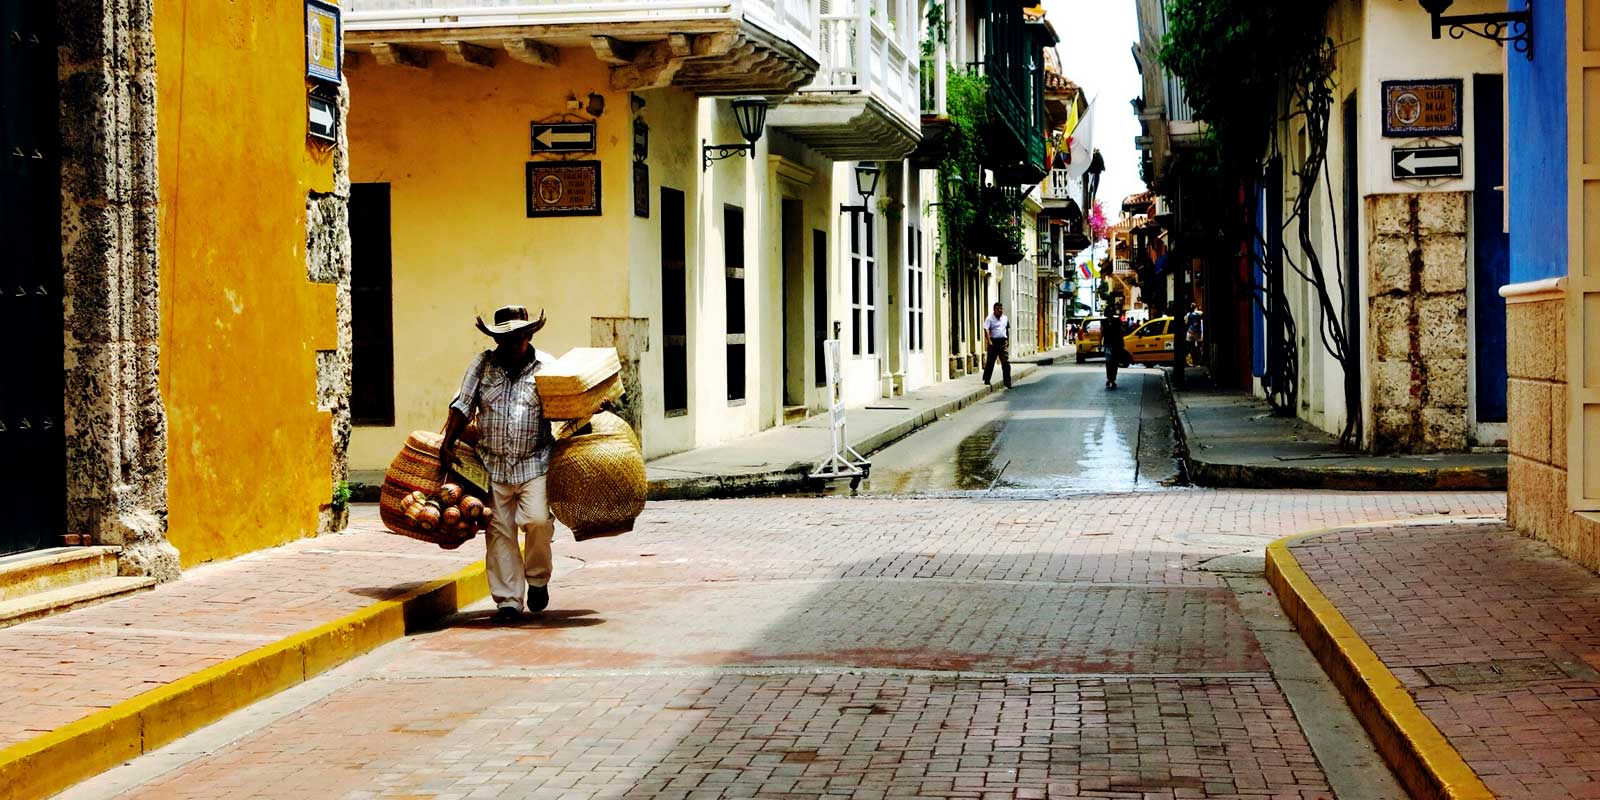 Travel colorfully in Cartagena, off the Caribbean coast of Colombia.